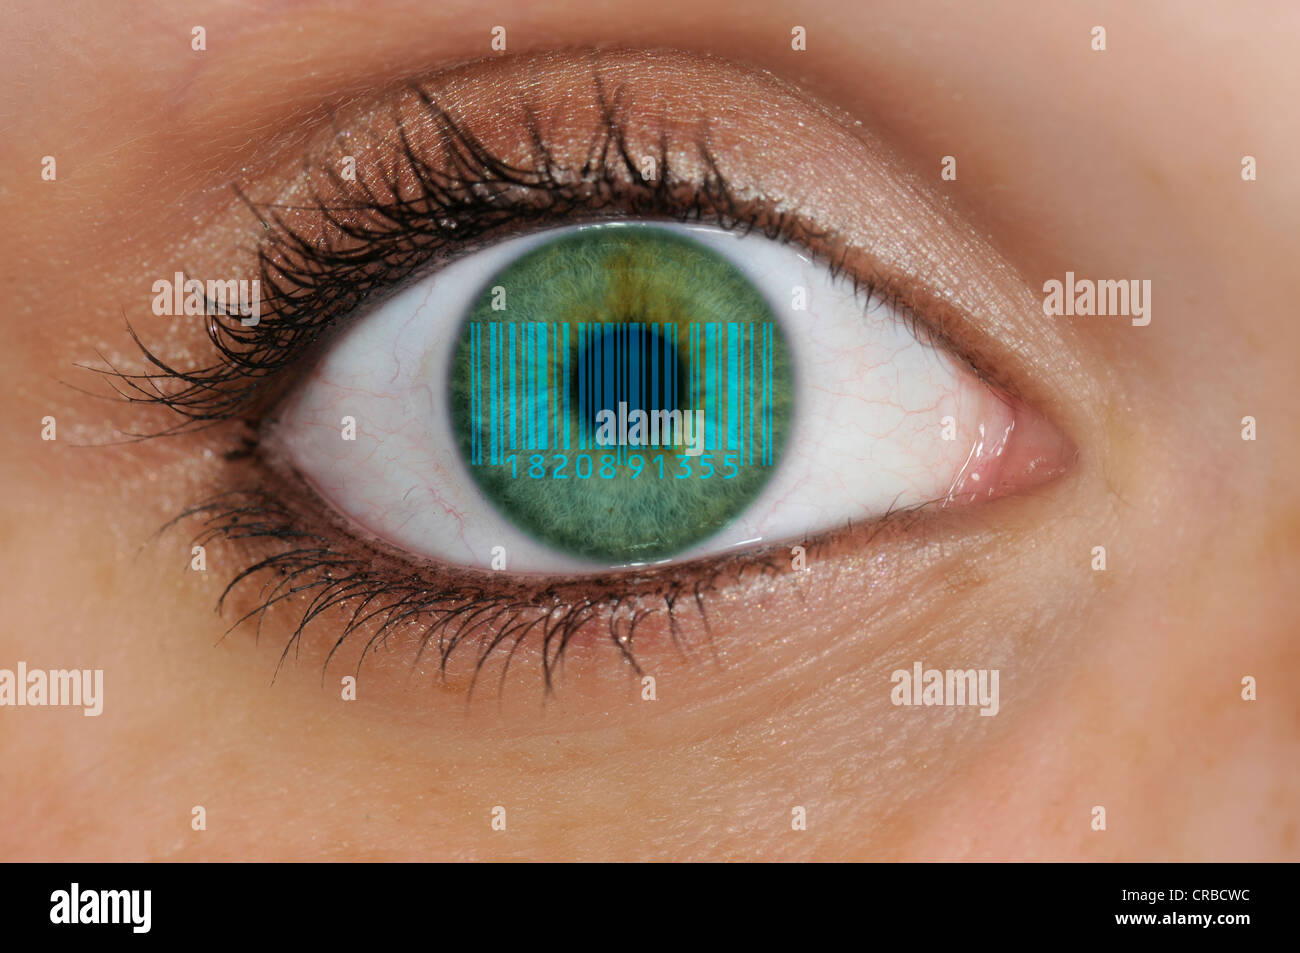 Detailed view of an eye with a barcode being reflected on the iris, EAN, European Article Number, International Article Number, Stock Photo